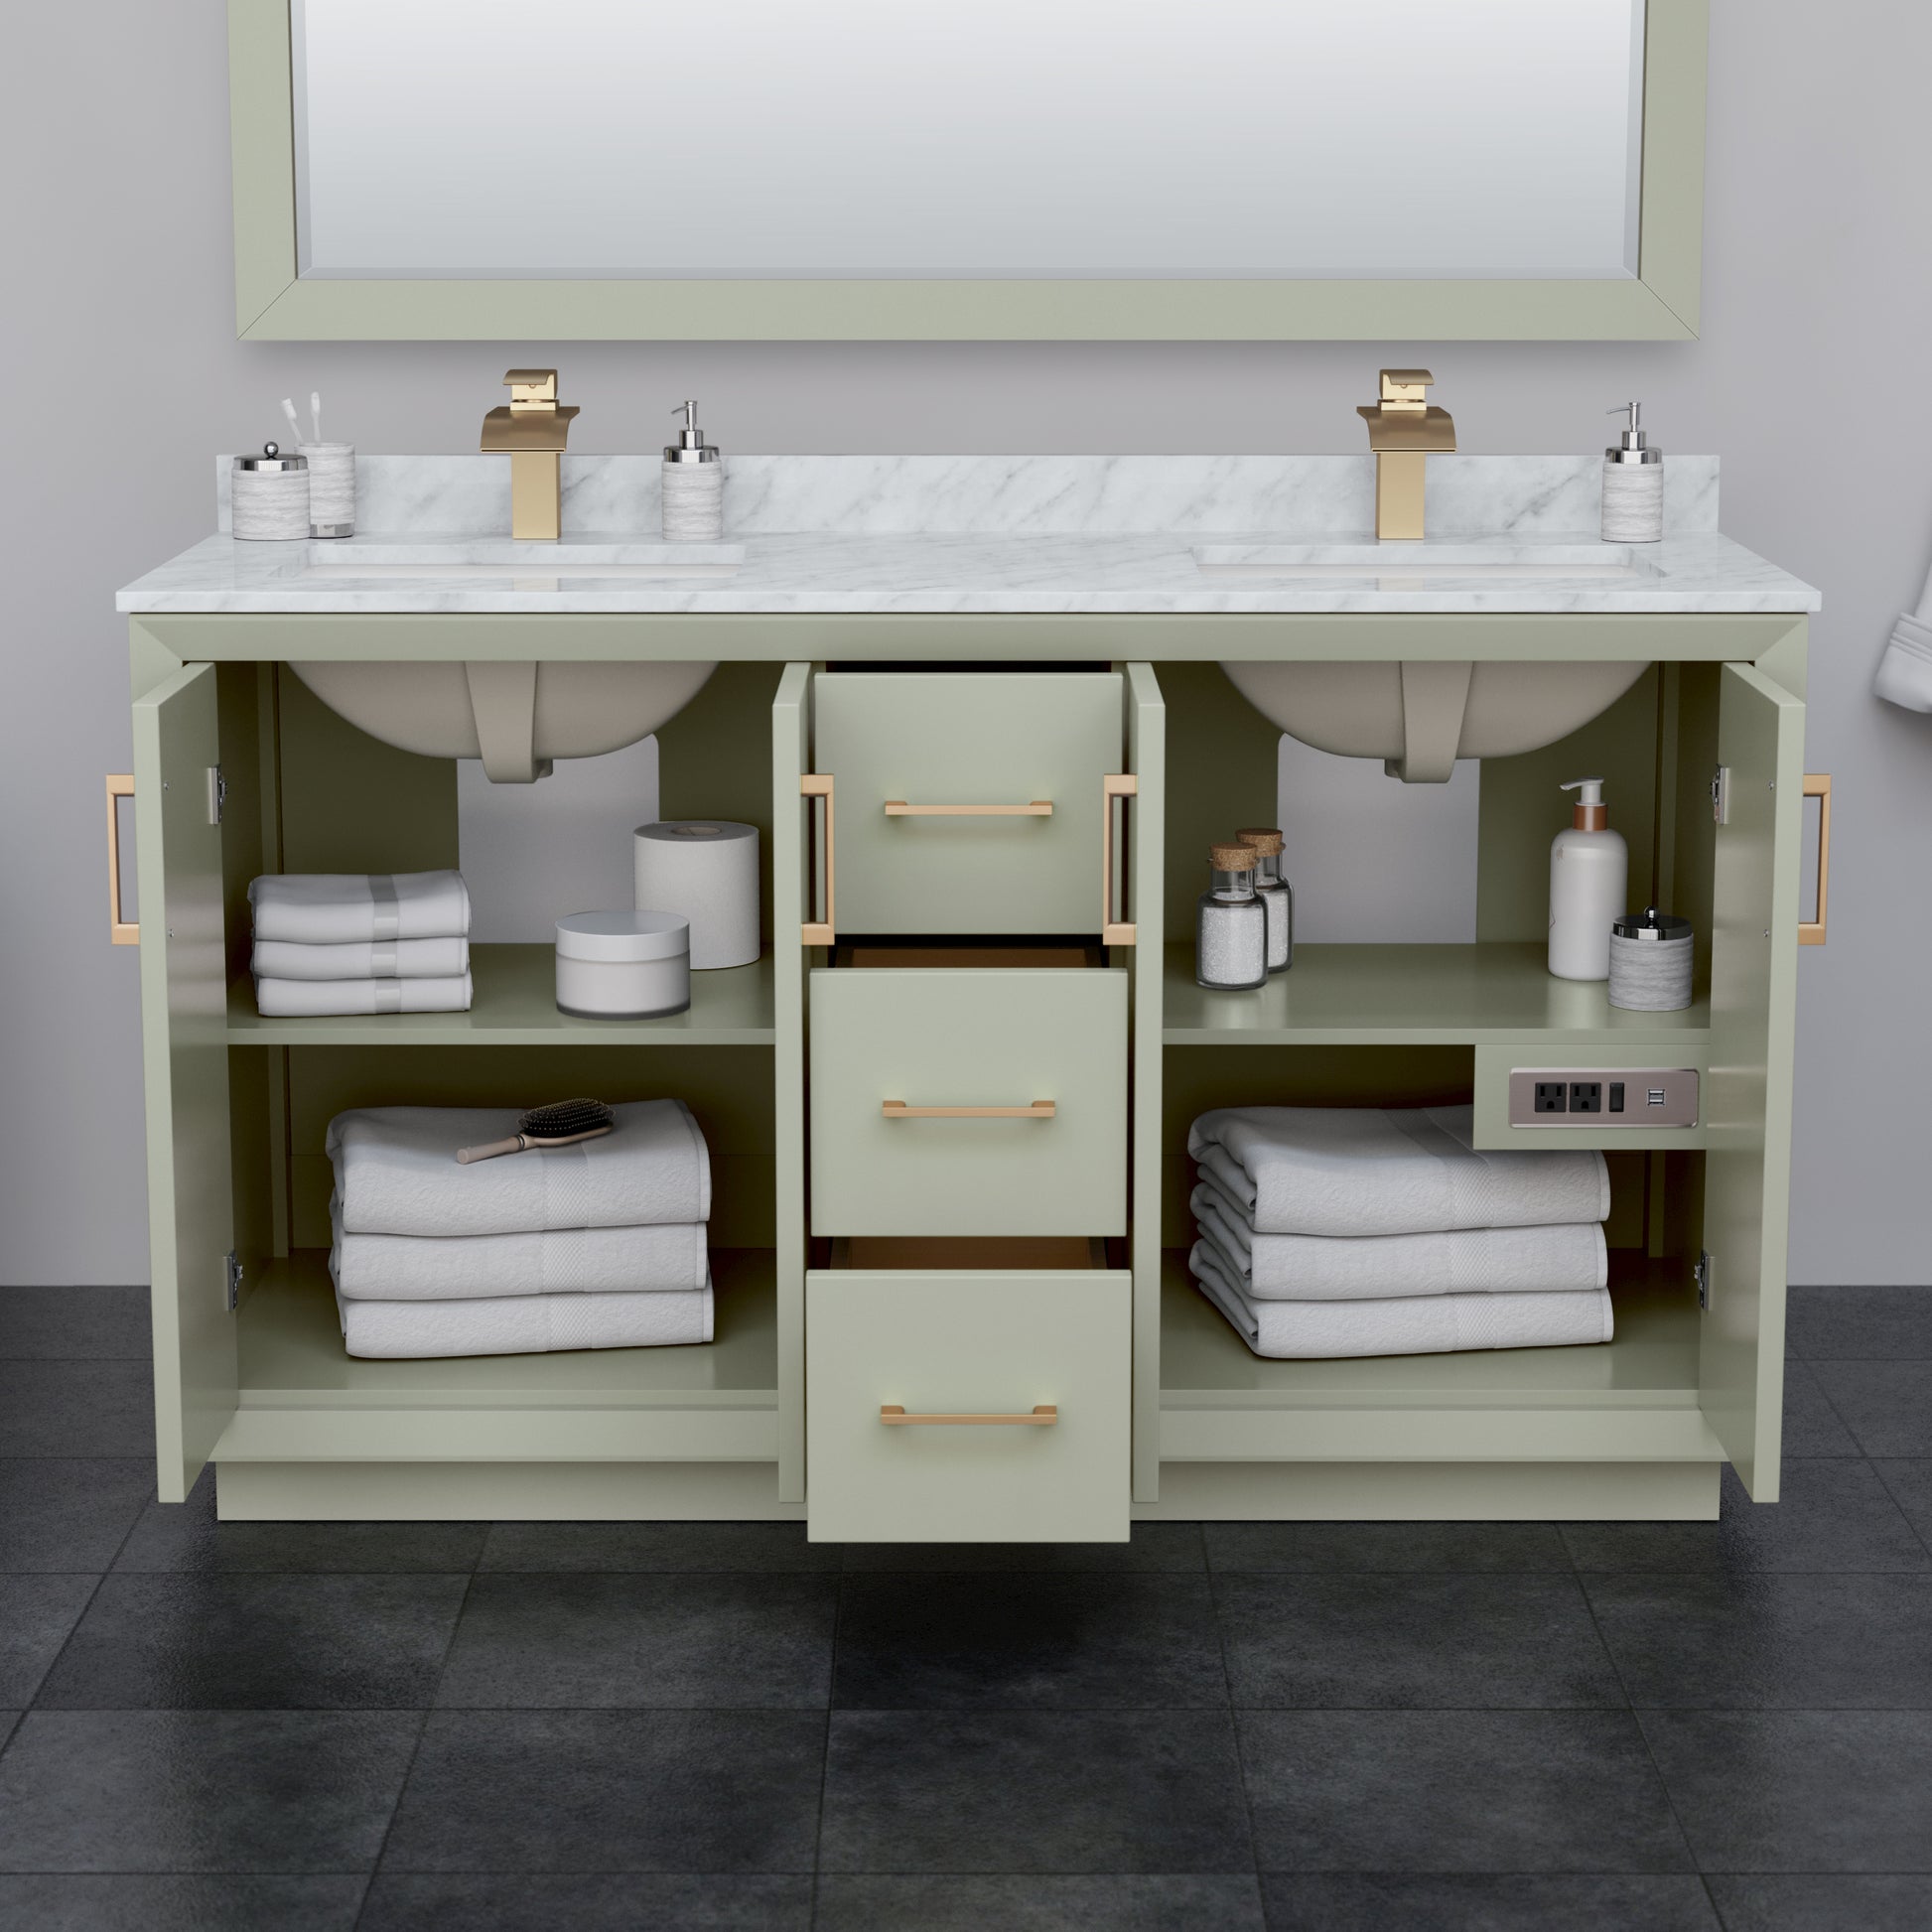 
  
  Strada Double Sink Vanity with Carrara Cultured Marble, Undermount Square Sink, Optional Trim and Mirror
  
